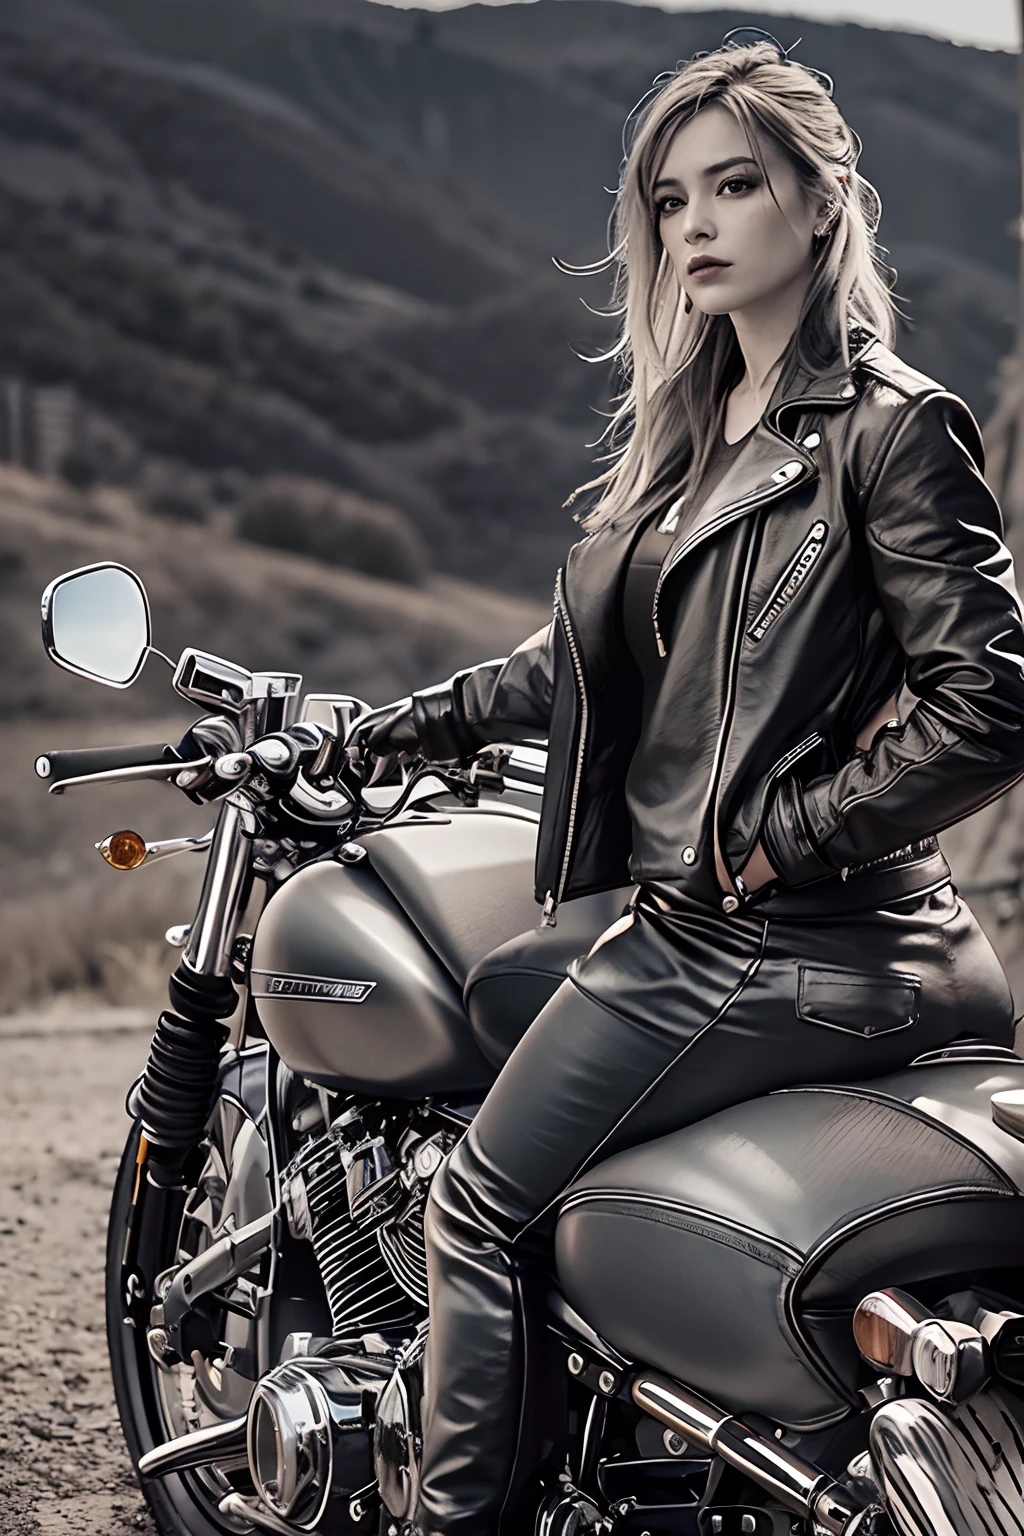 Araped woman standing next to a motorcycle on a hill, Photo of a female biker, Harley-Davidson Motorcycle, motorcycle, motorcycle, Harley-Davidson, B&W Photo, Motorcycle rider, Harley Quinn, Sitting on a motorcycle, motorcycle, Riding a motorcycle, biker, Bad look, chrome motorcycle parts, Art,Ultra8K